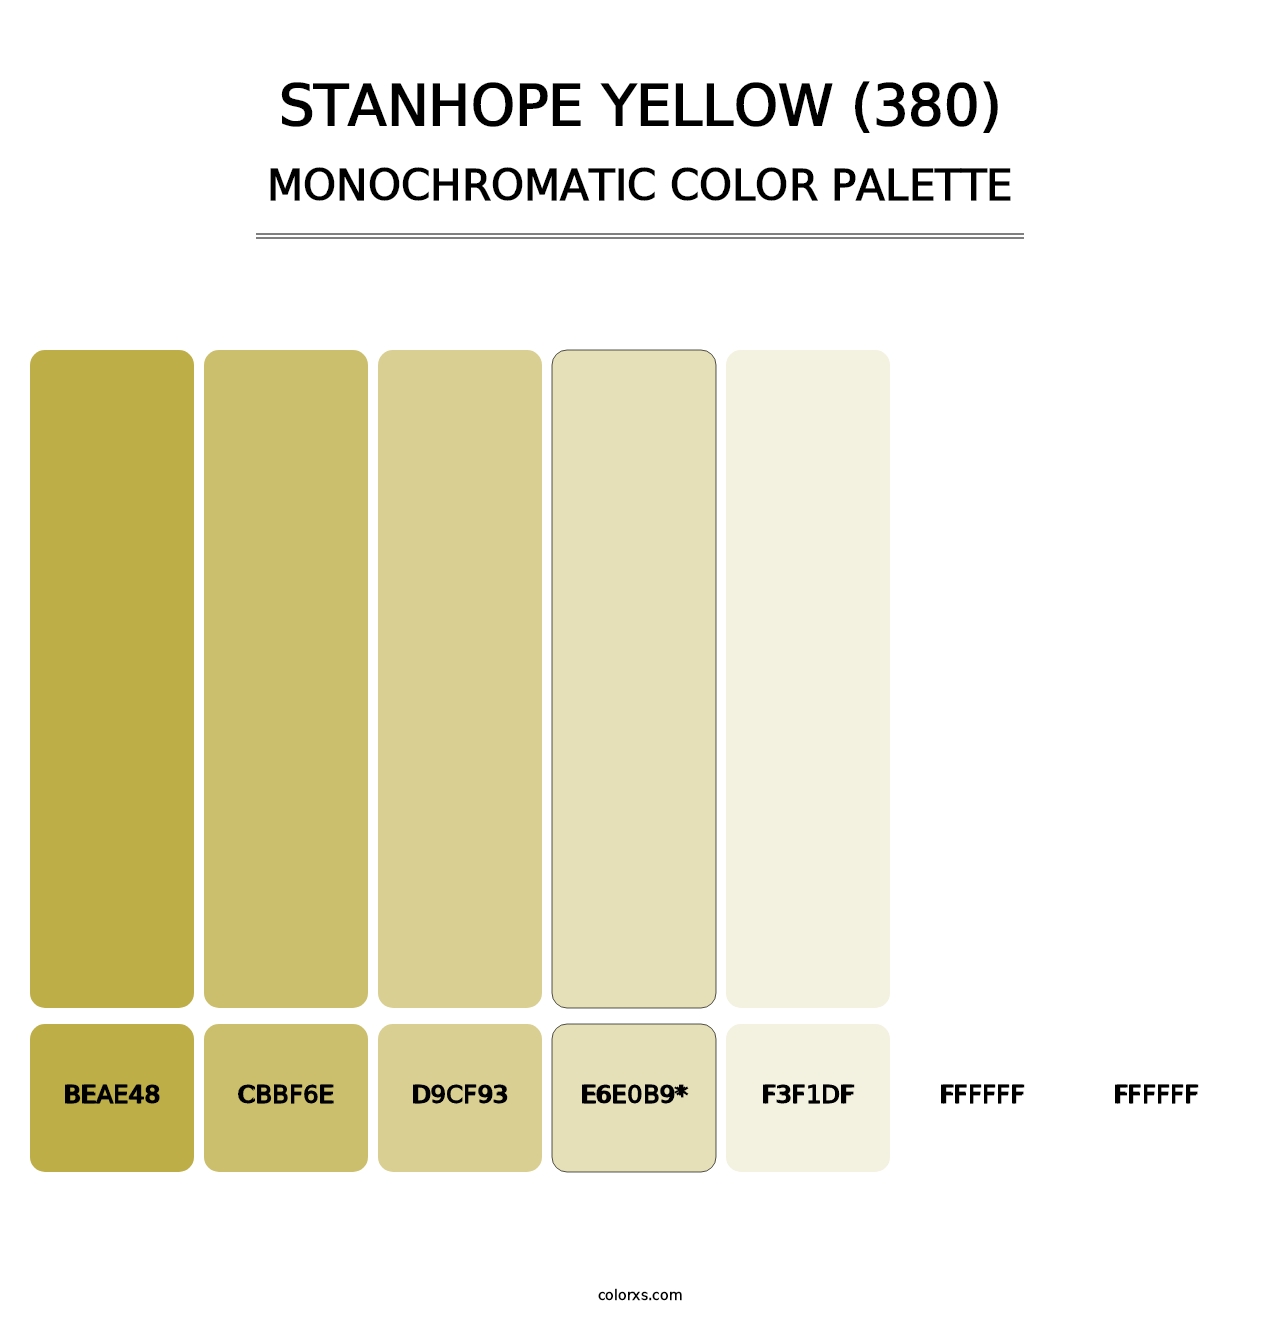 Stanhope Yellow (380) - Monochromatic Color Palette